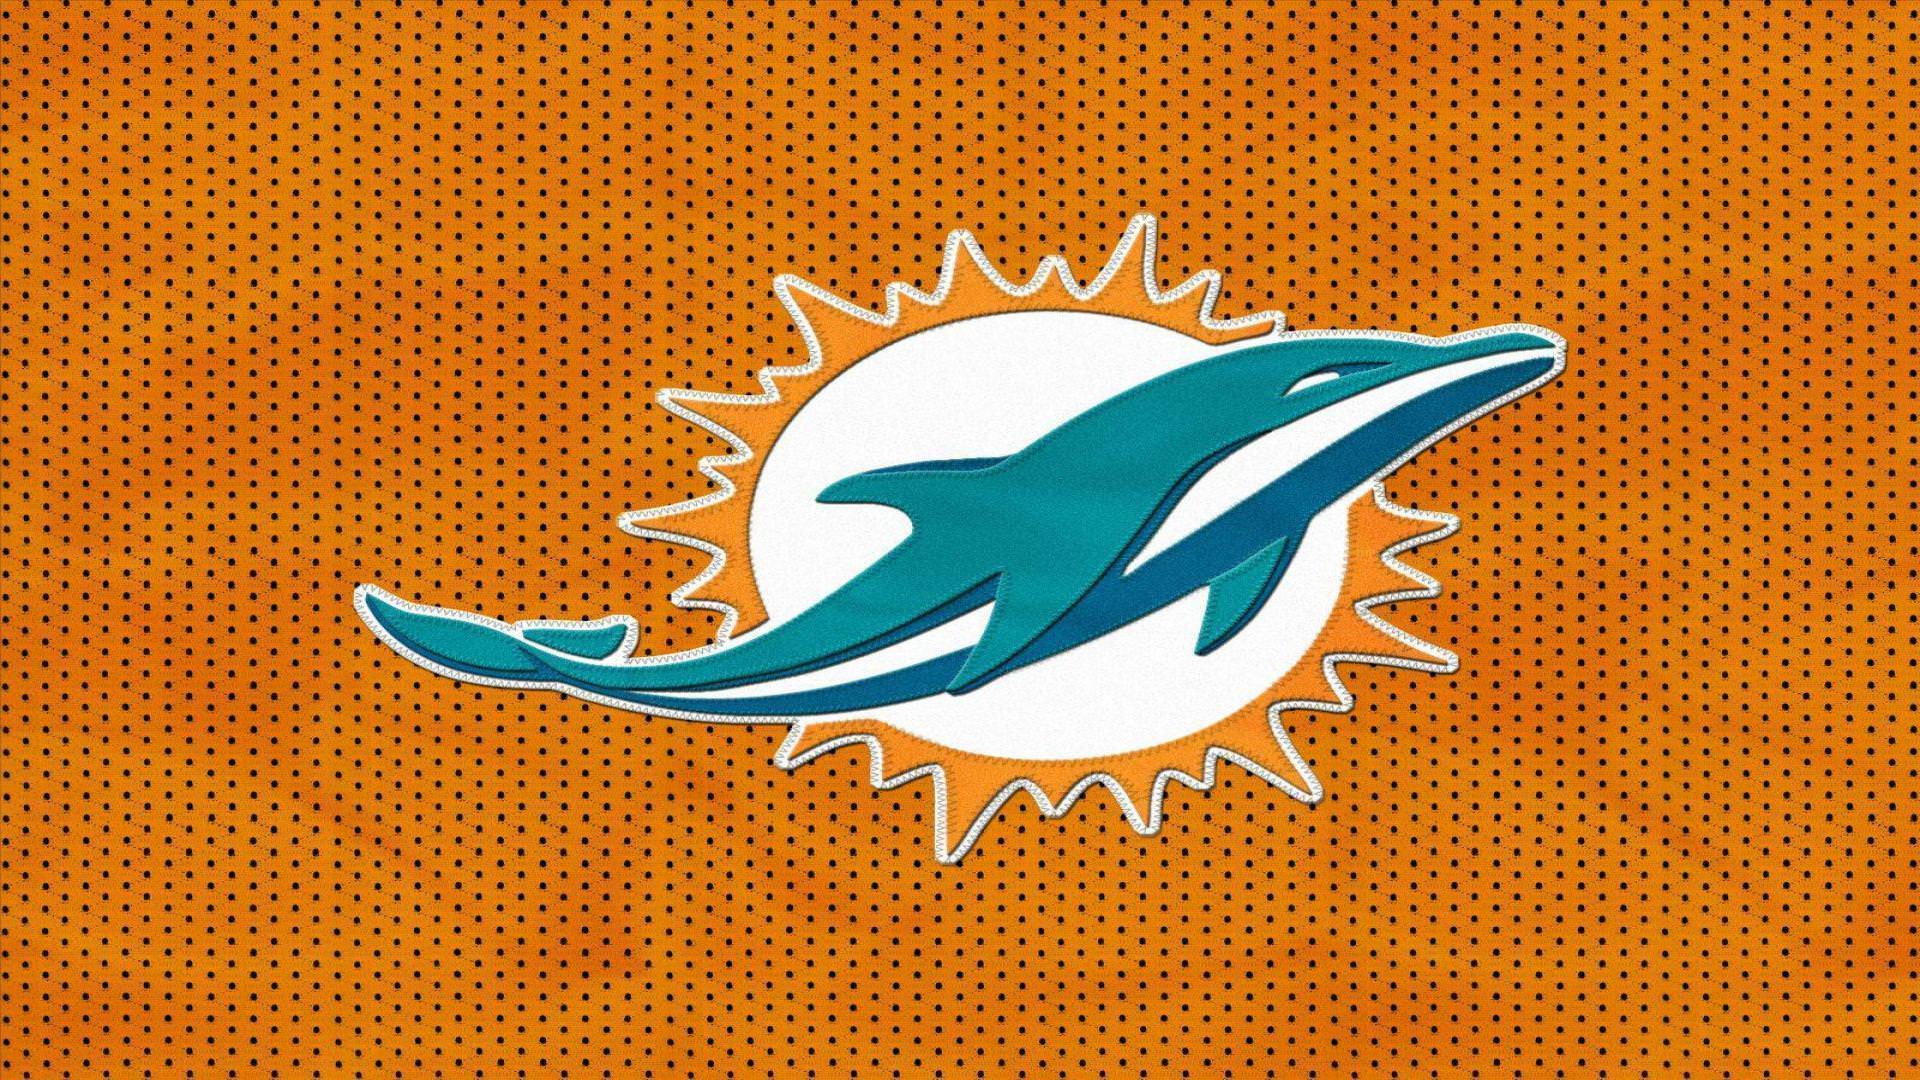 Miami Dolphins wallpaper by Scroggins  Download on ZEDGE  f5df